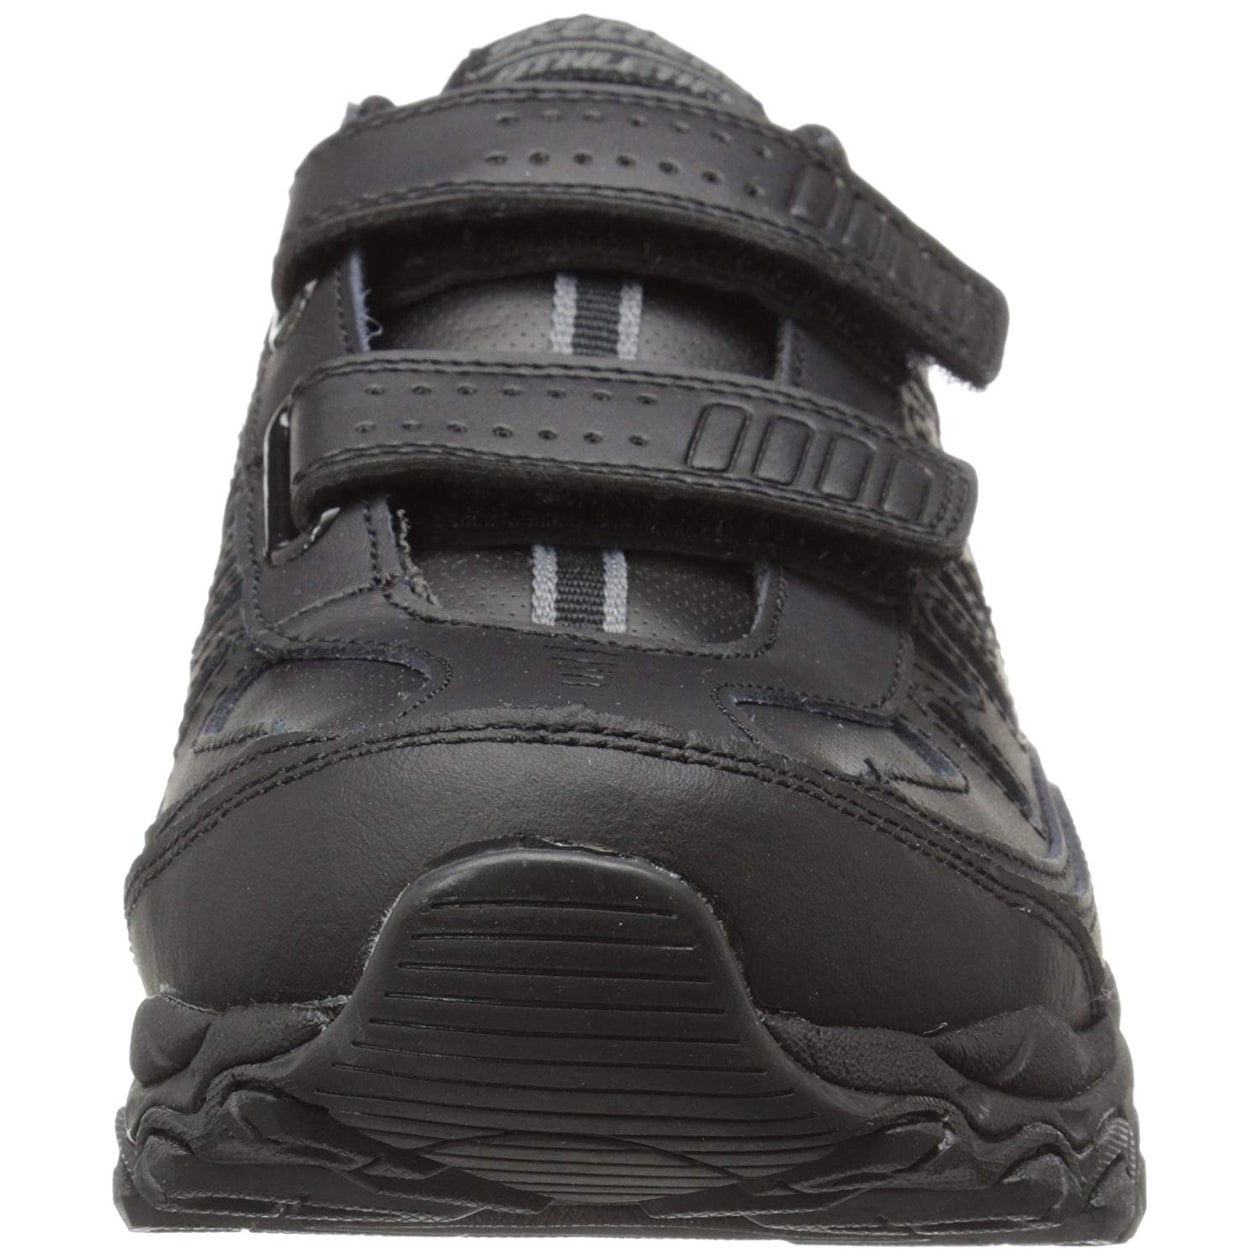 skechers shoes with velcro straps